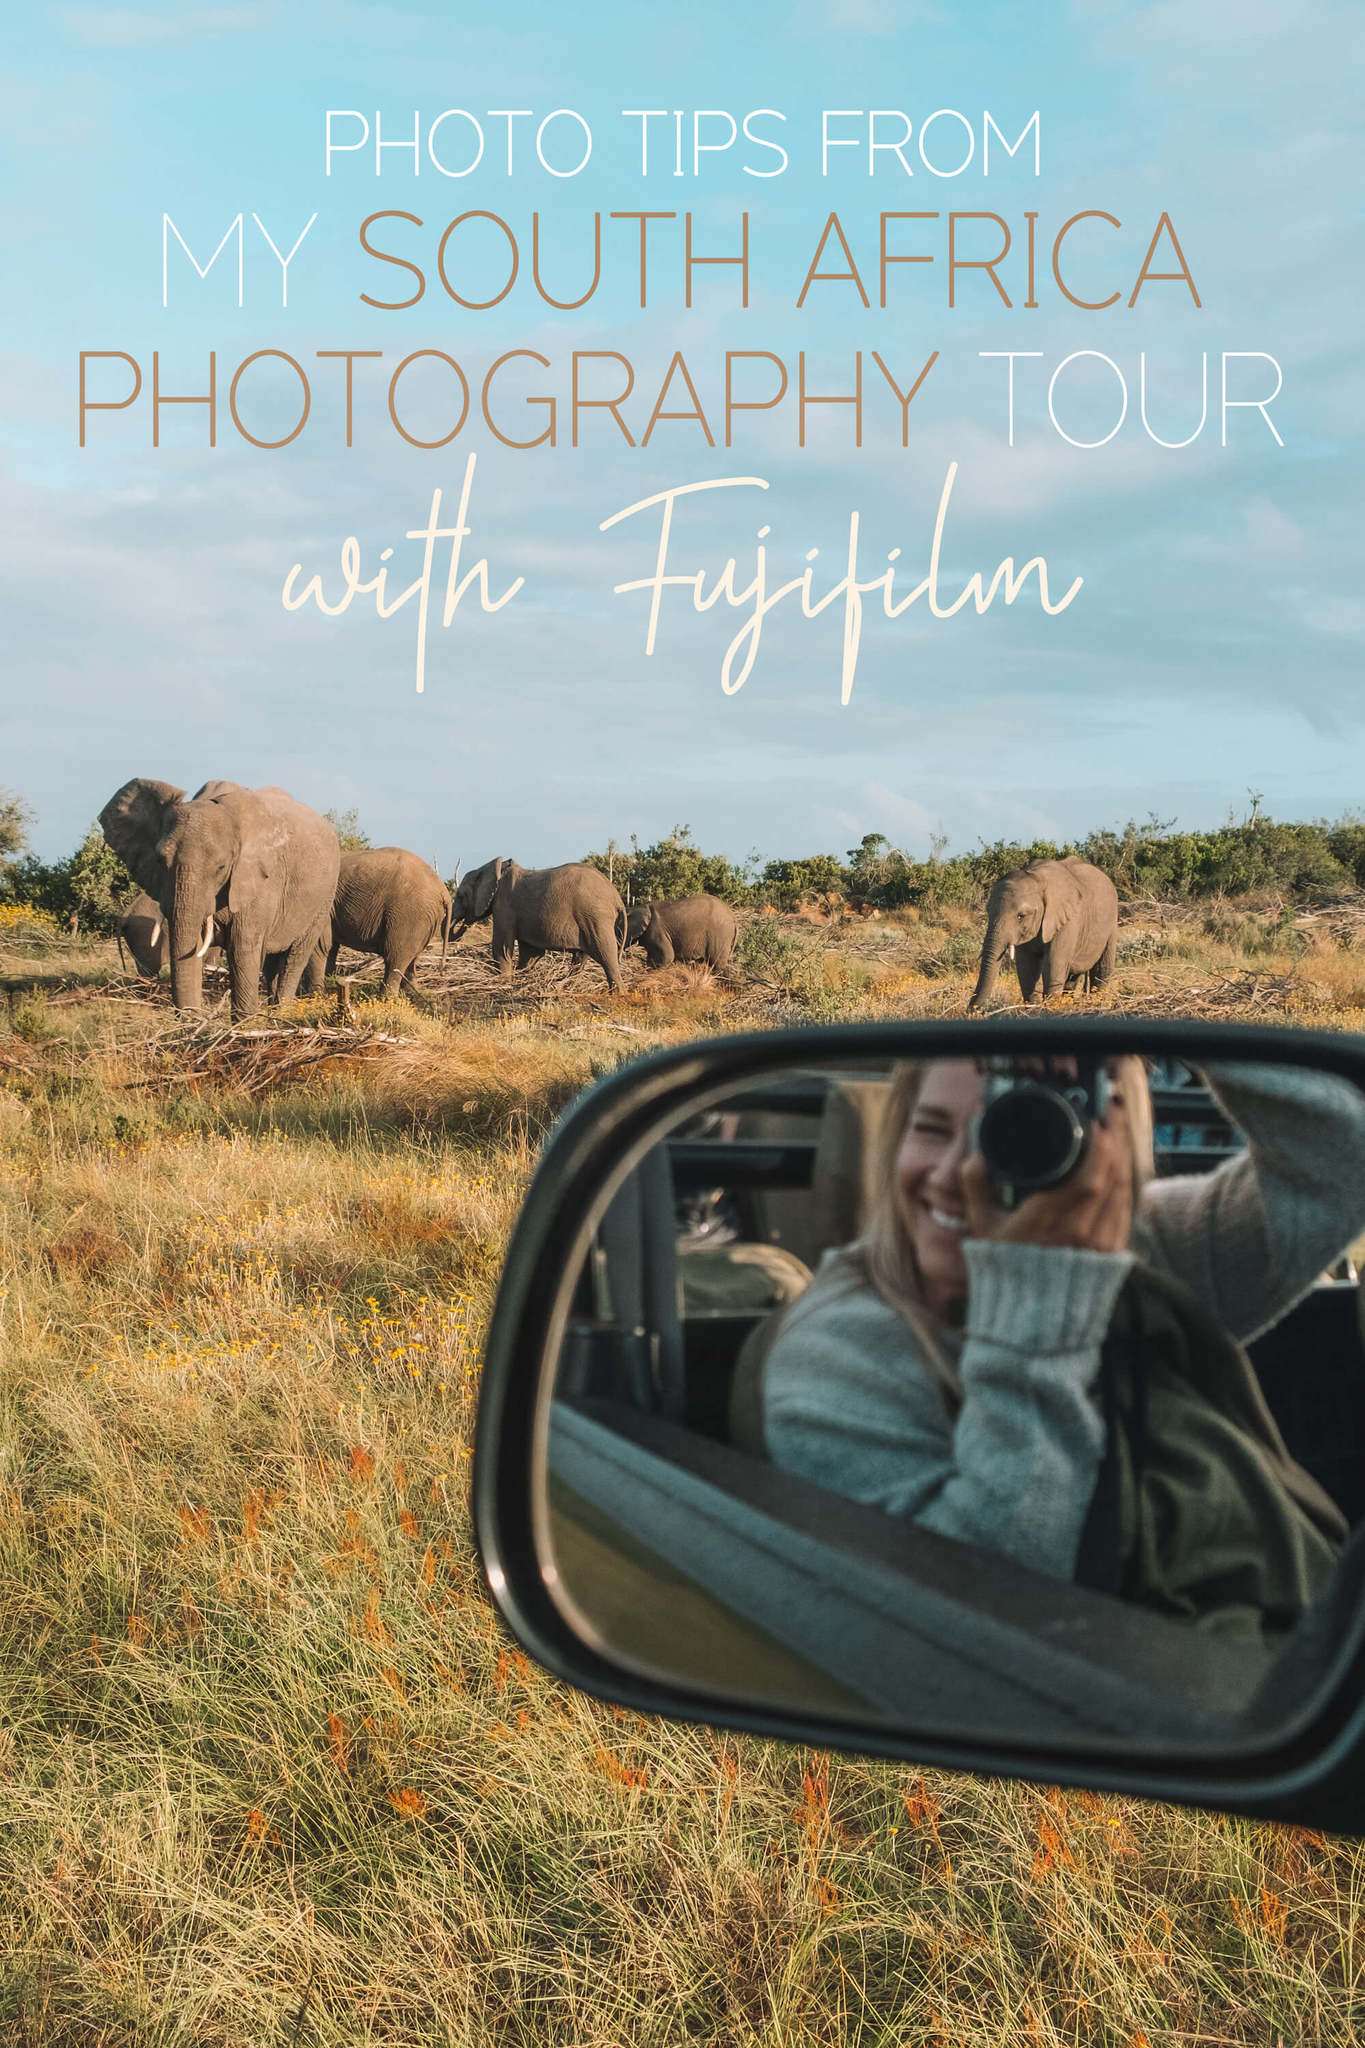 Photo Tips from My South Africa Photography Tour